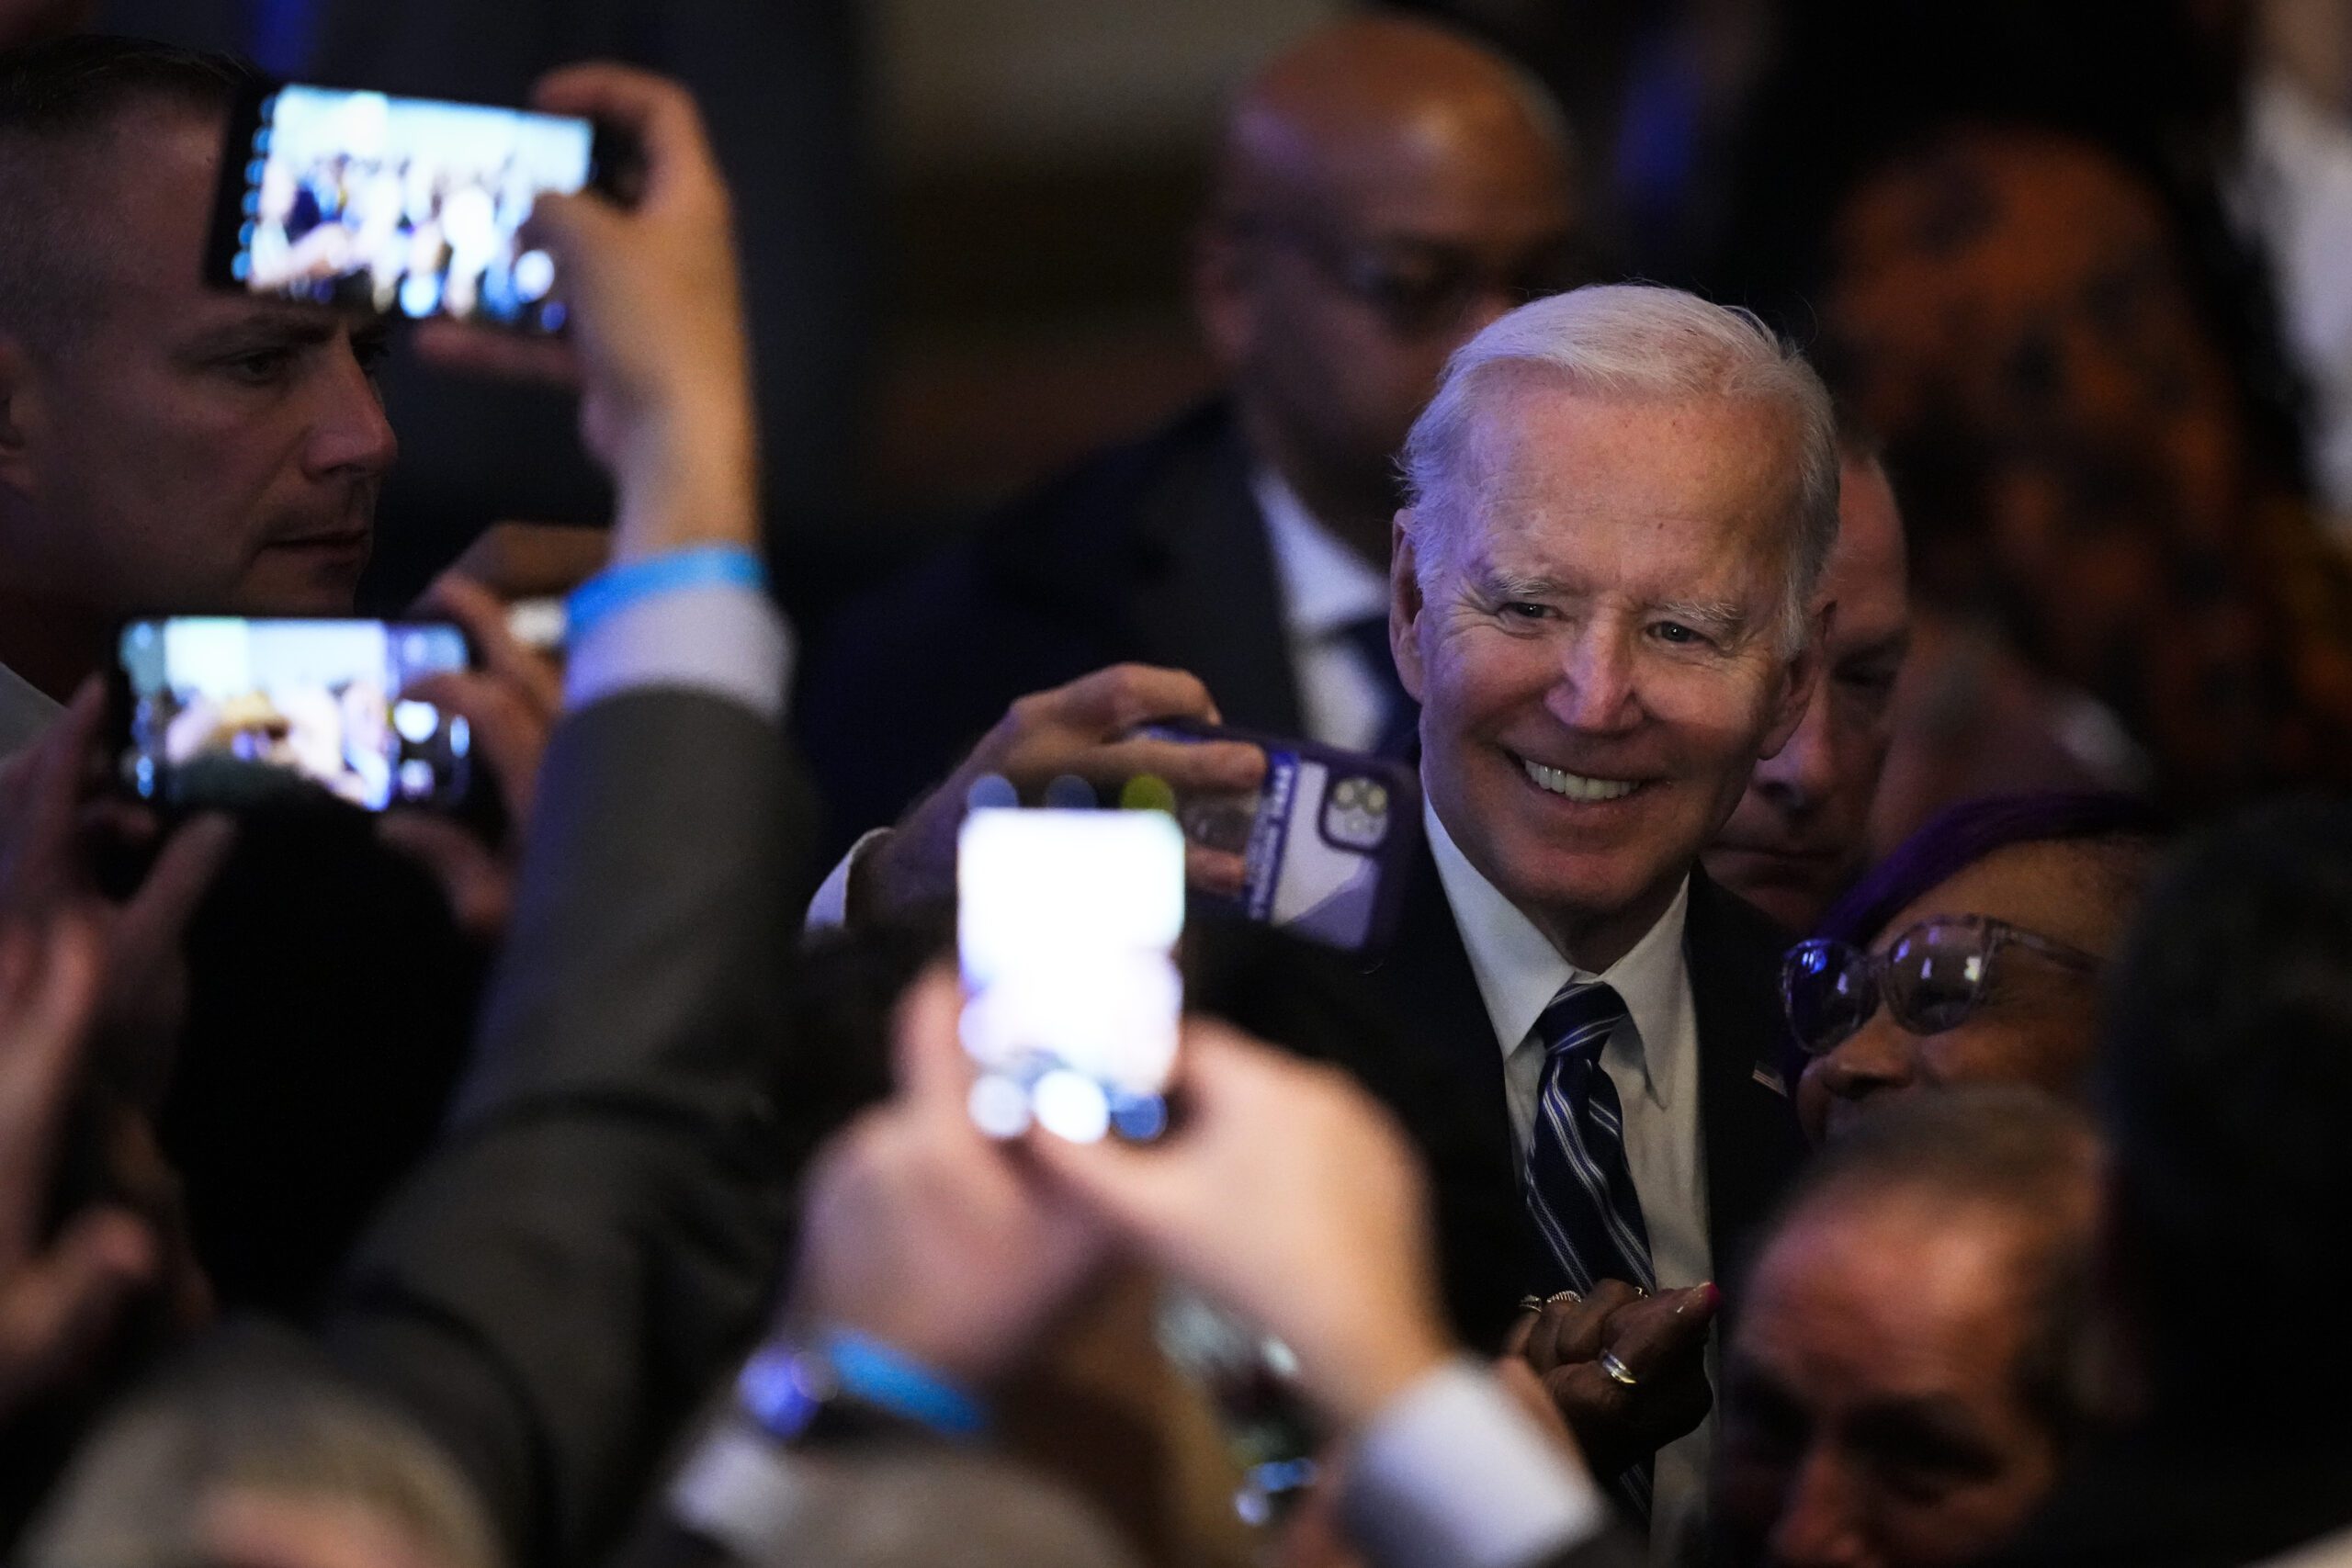 flexing-his-wins-and-eyeing-a-2nd-term,-biden-will-lay-out-contrasts-with-gop-in-state-of-the-union